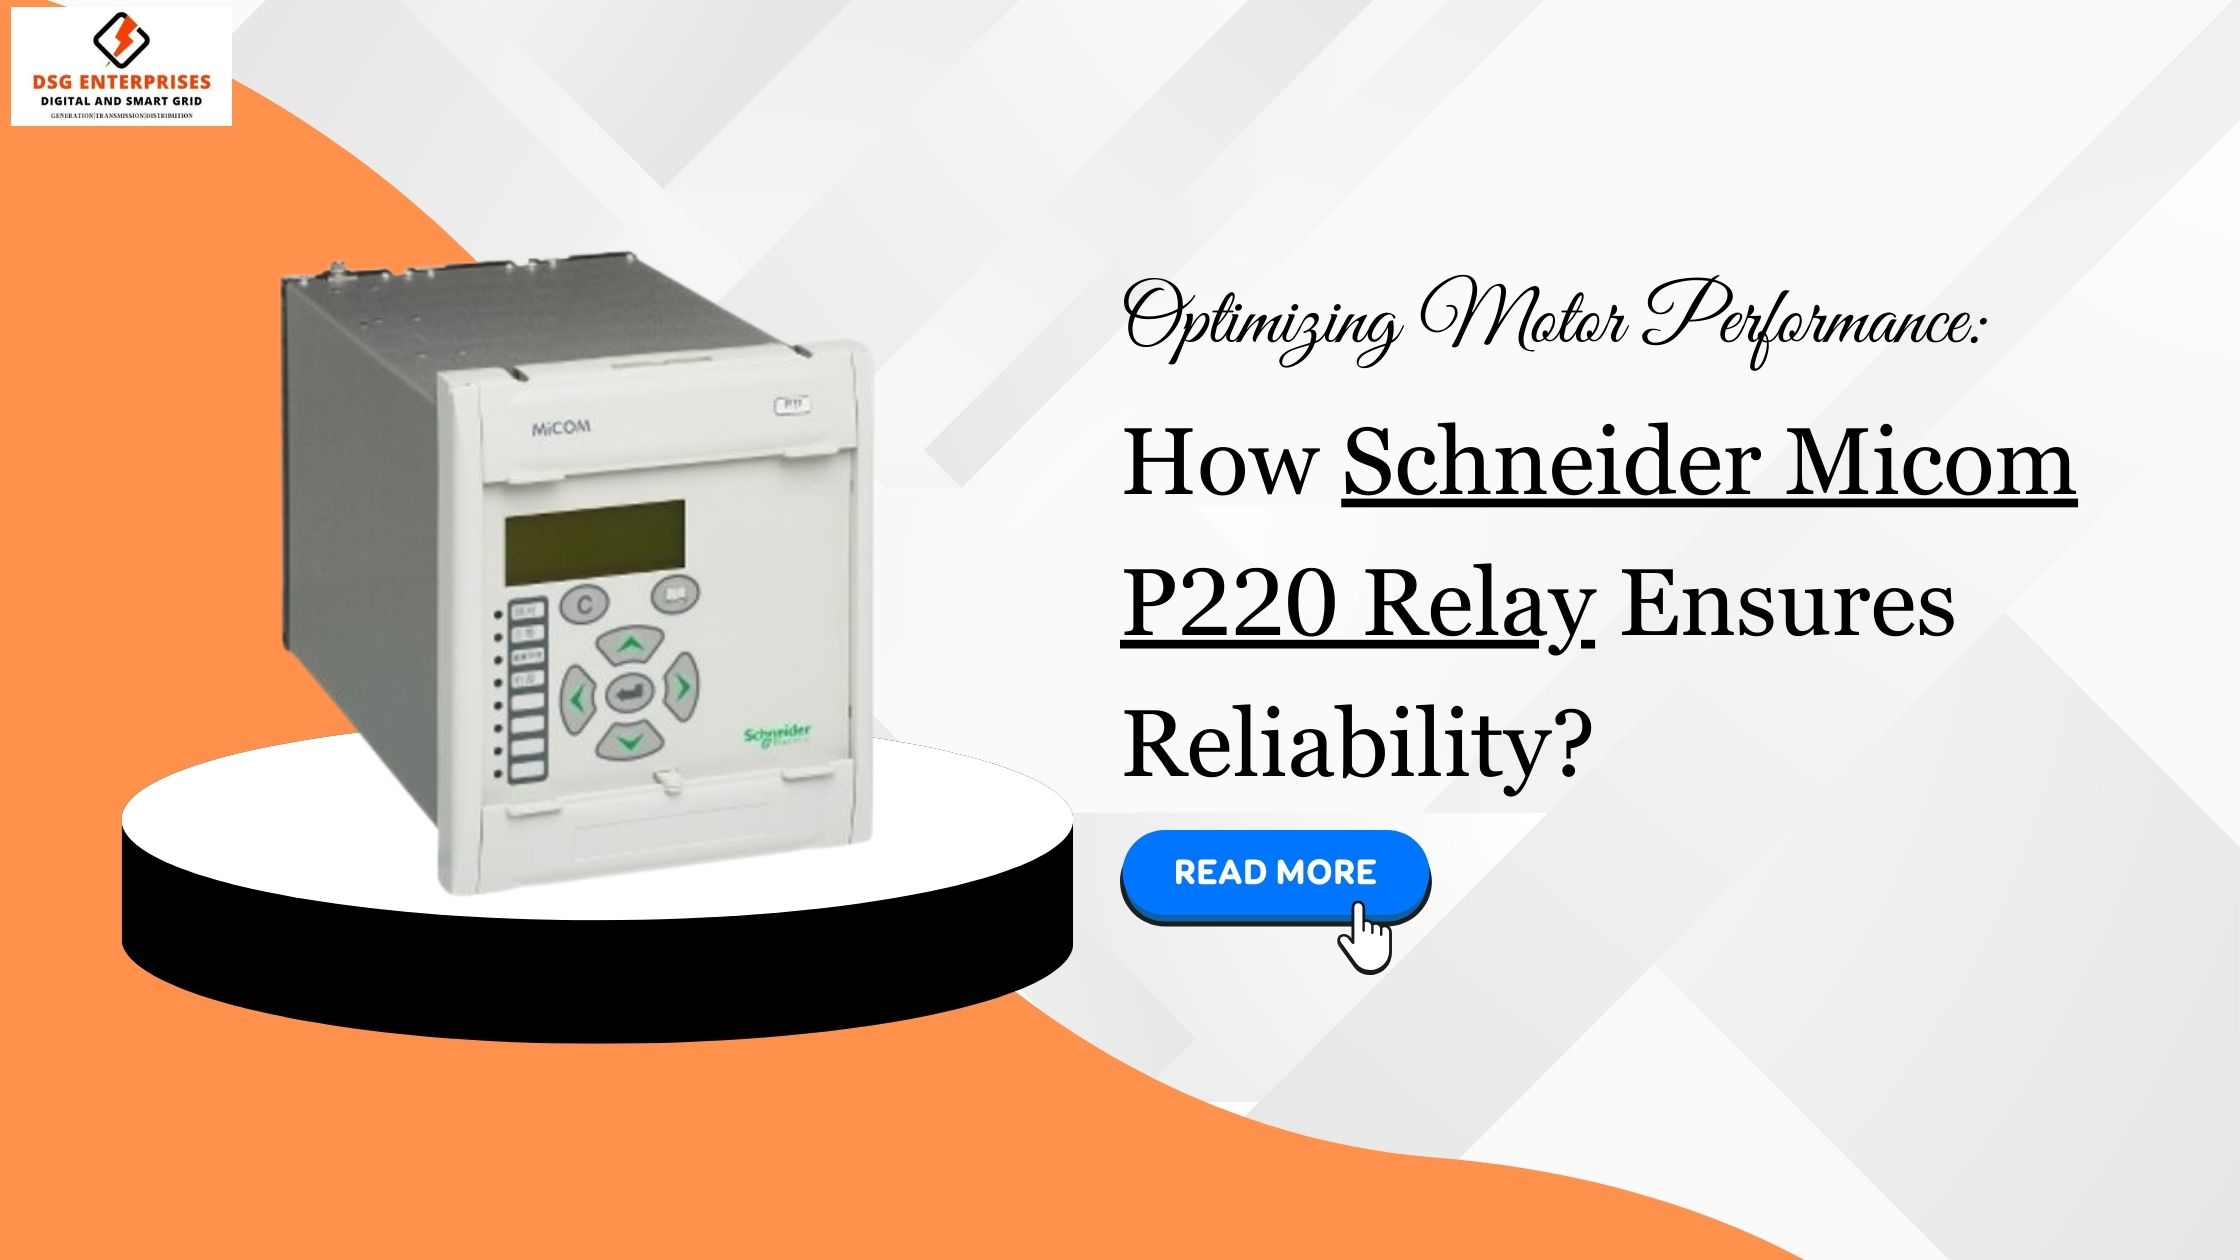 You are currently viewing Optimizing Motor Performance: How Schneider Micom P220 Relay Ensures Reliability